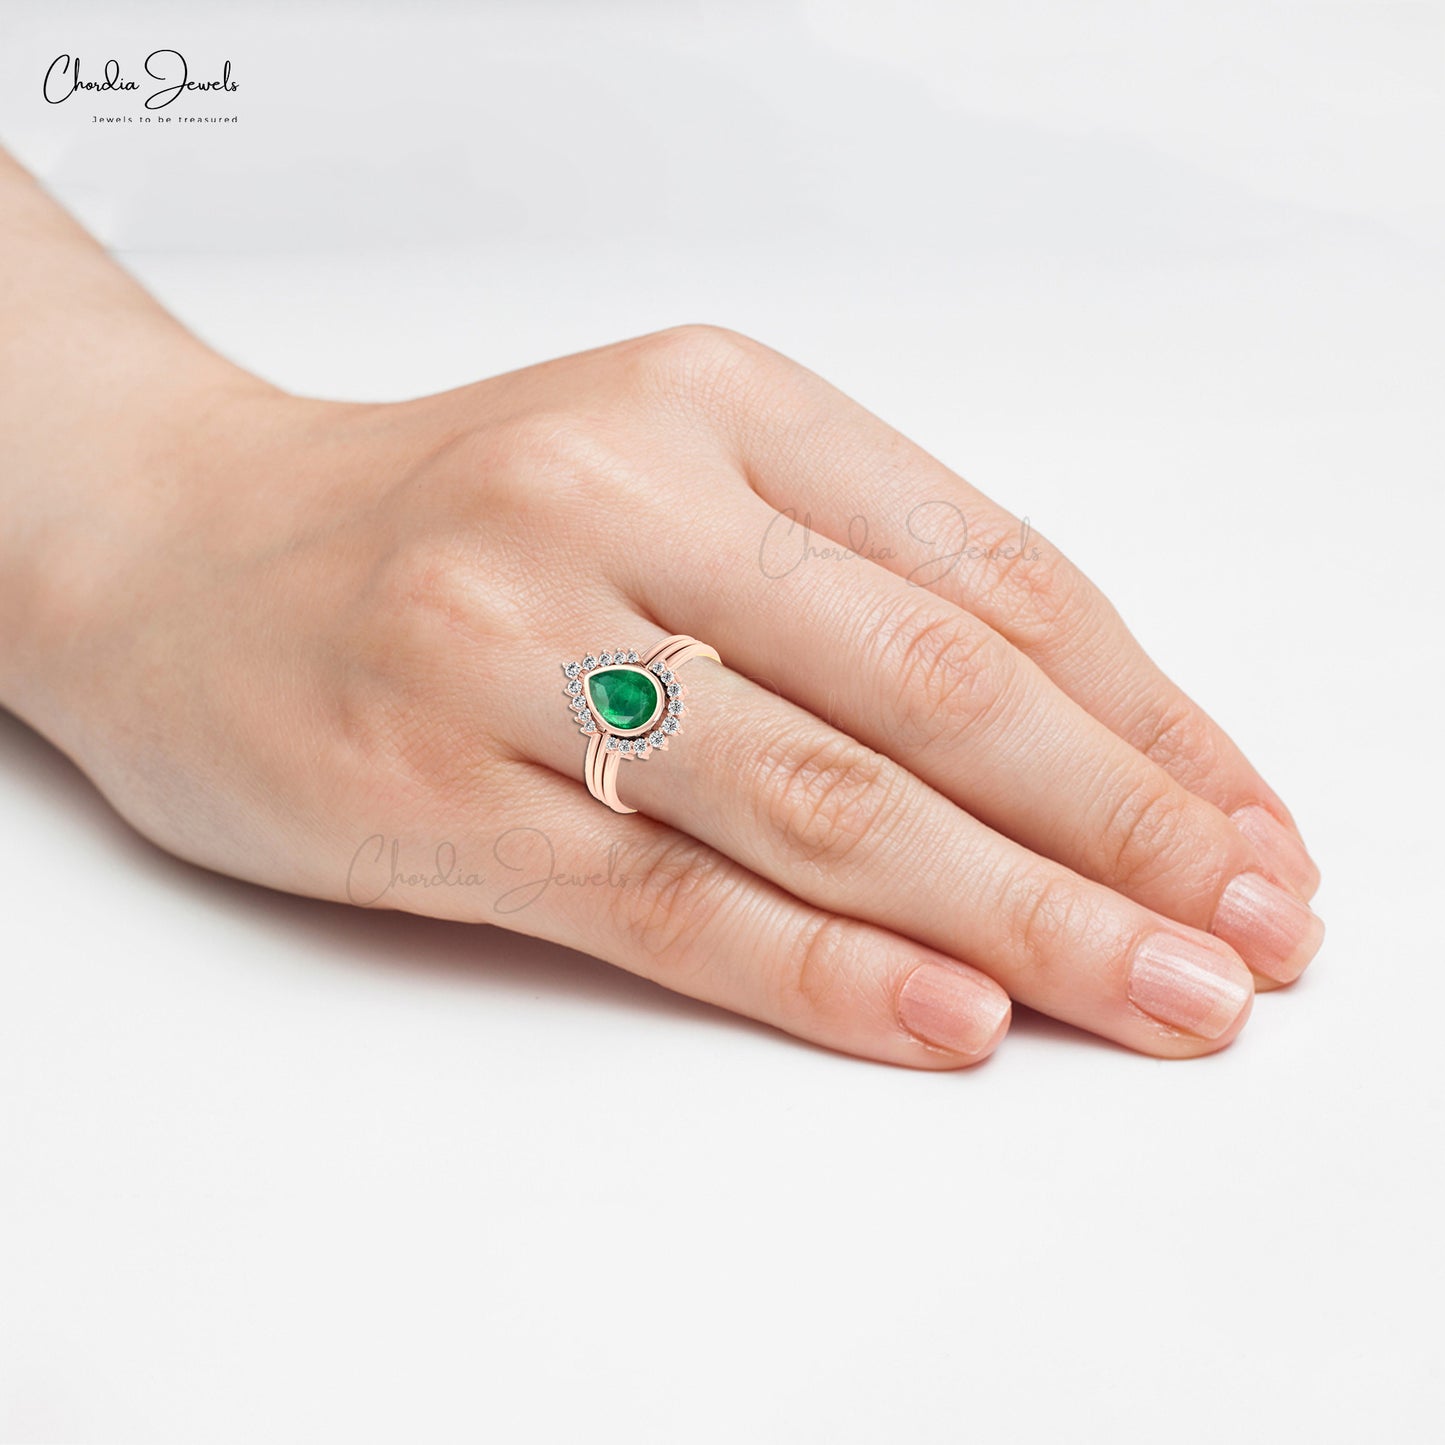 Genuine Emerald 7X5mm Pear Cut Gemstone Stackble Dainty Ring 14k Solid Gold Diamond Ring For Her